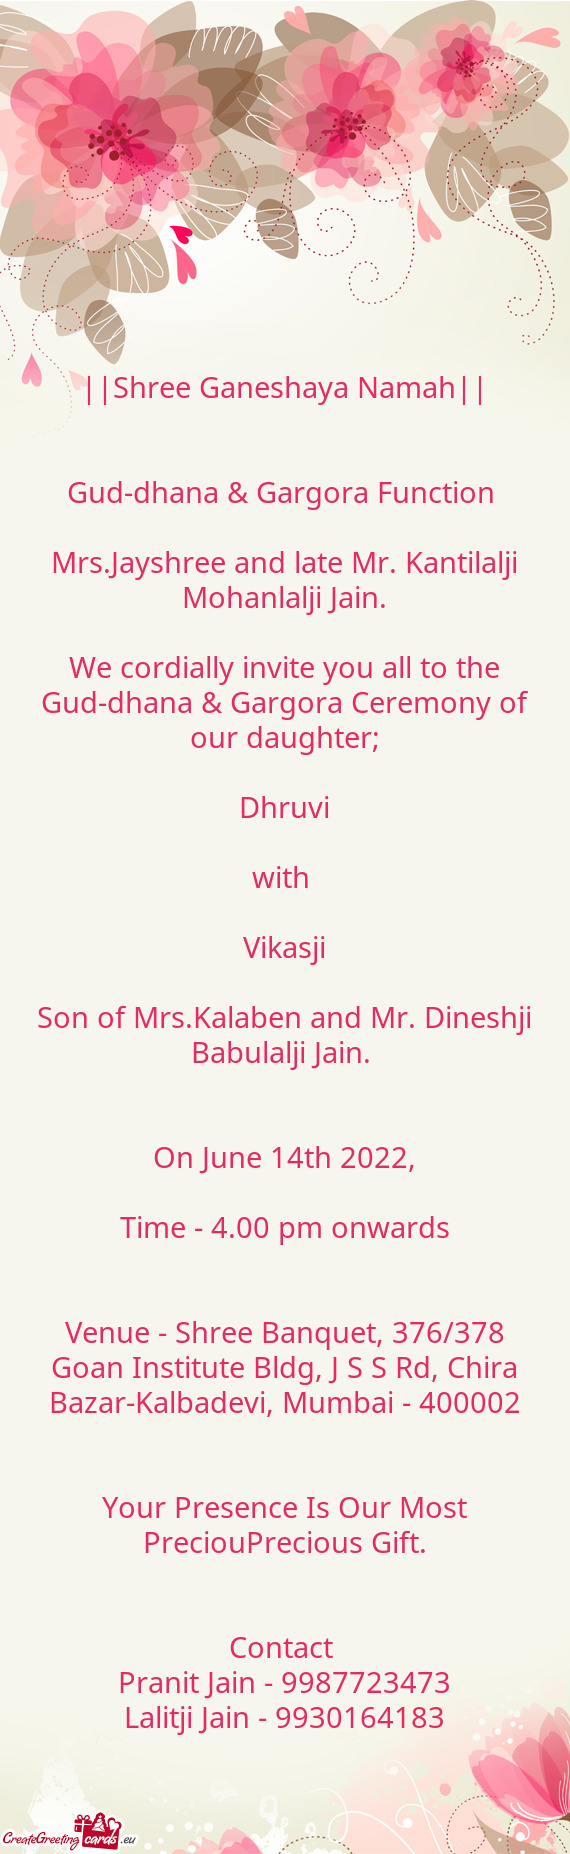 We cordially invite you all to the Gud-dhana & Gargora Ceremony of our daughter;